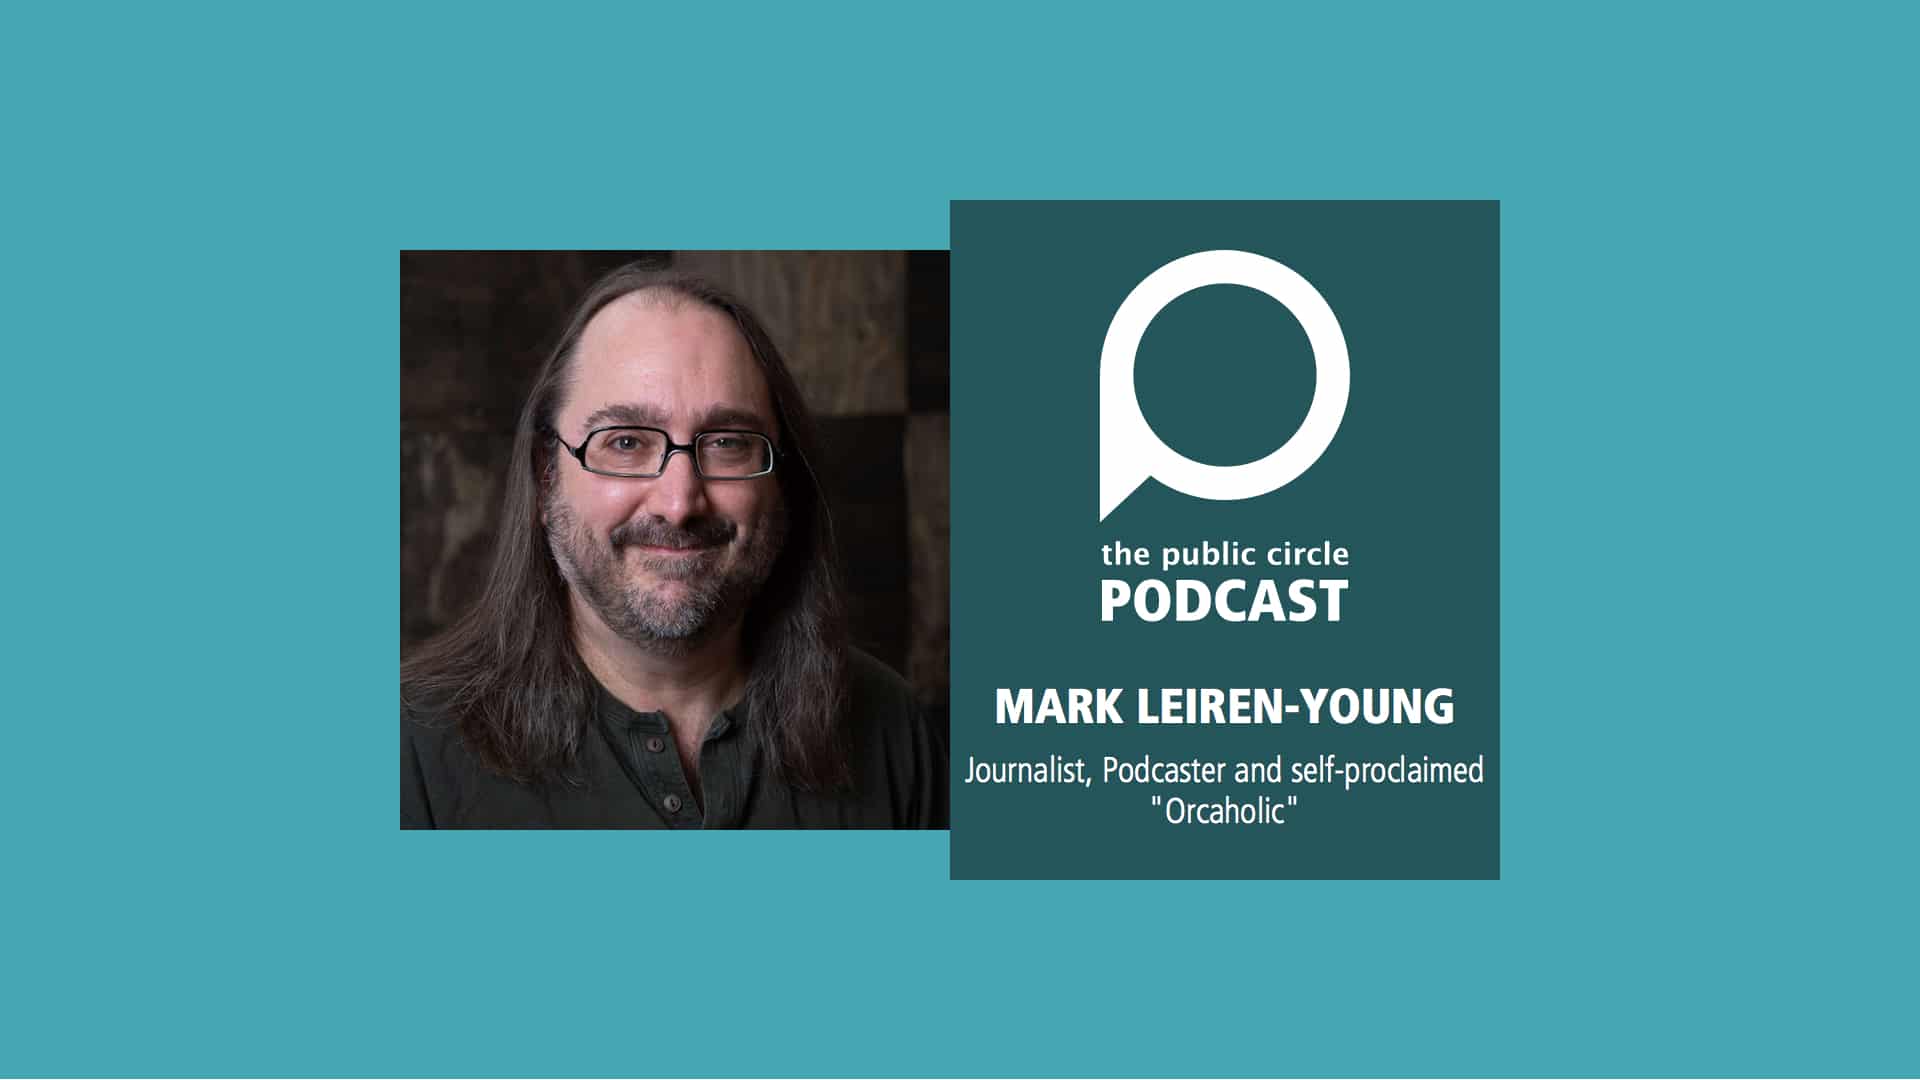 PODCAST: Mark Leiren-Young – Journalist, podcaster and self-proclaimed Orcaholic